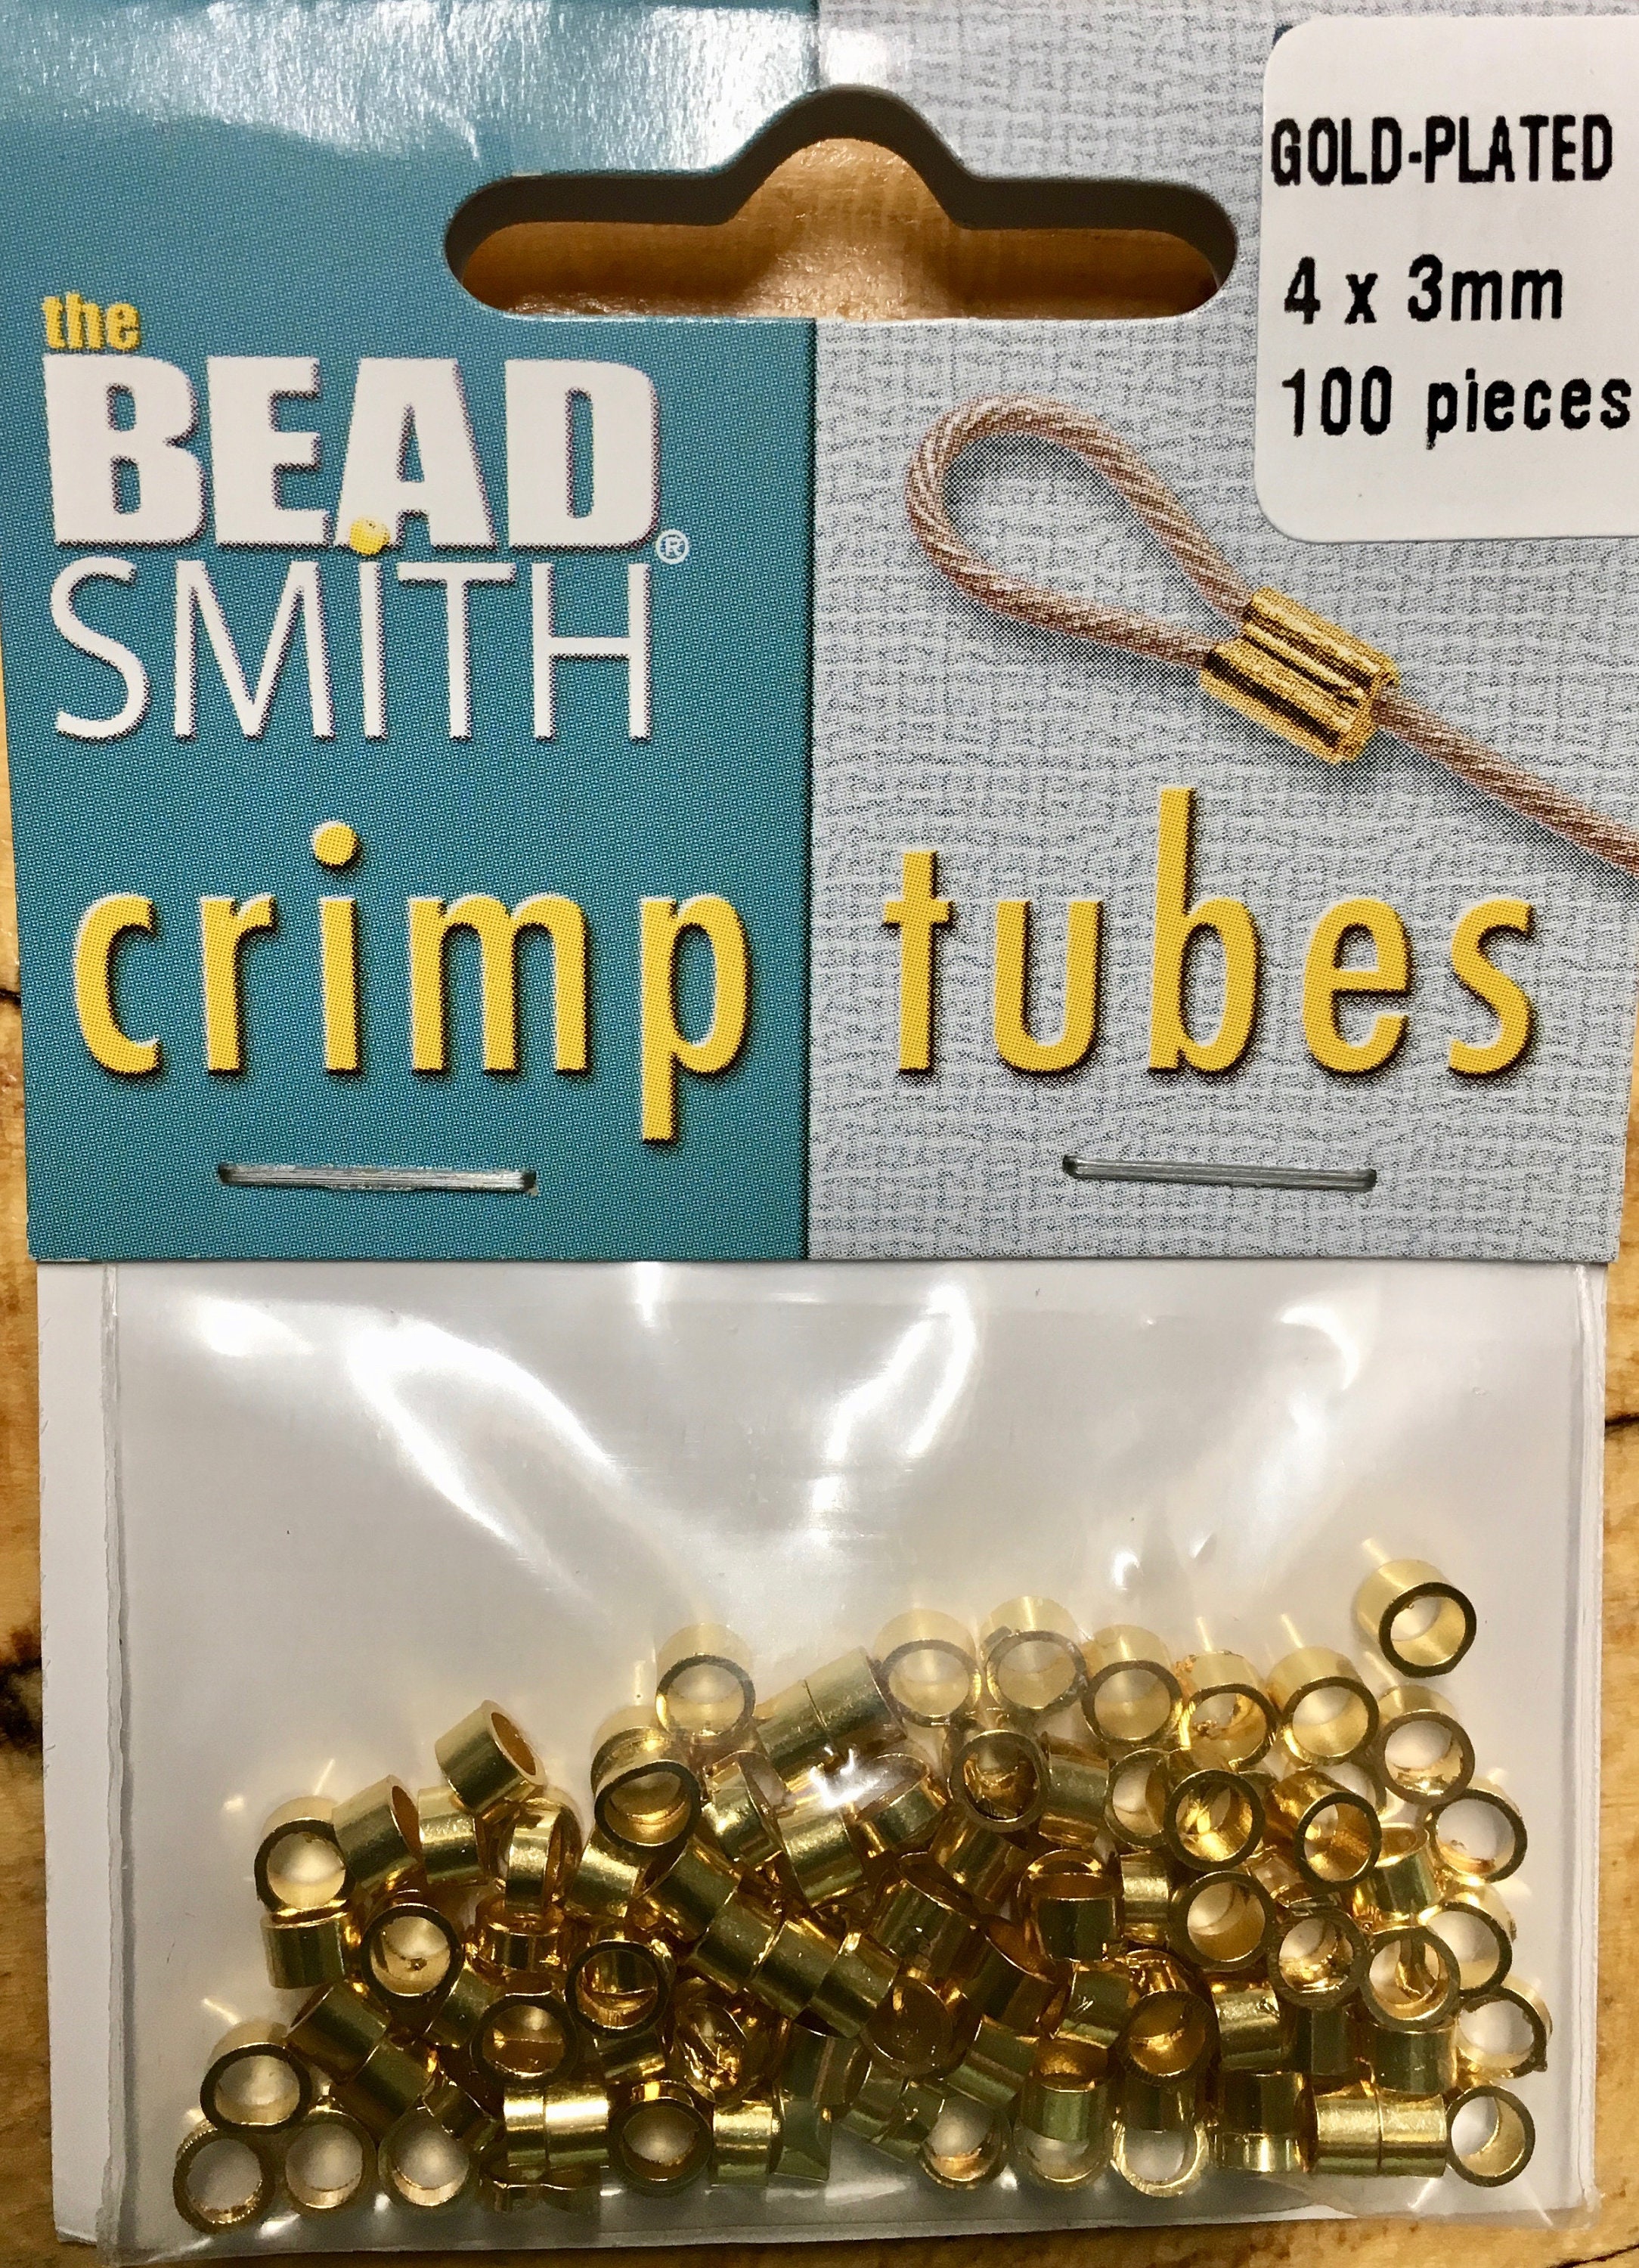 Gold Plated Crimp Beads, 100 Pieces, Crimping Tube Beads for